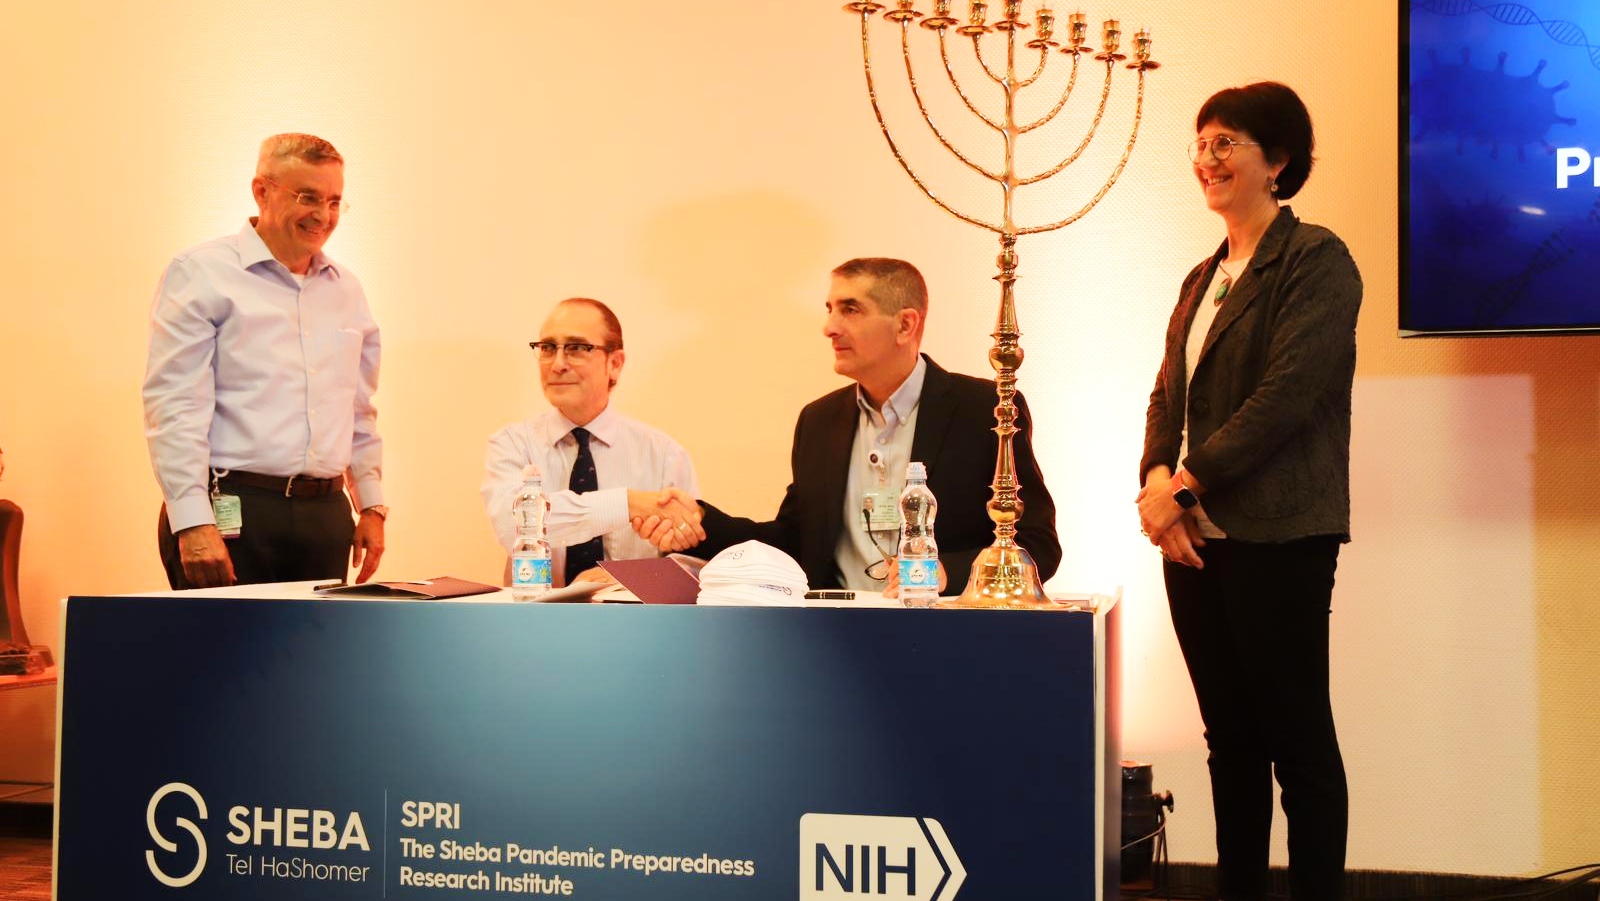 Dr. Daniel Douek from the NIH and Sheba Medical Center CEO Prof. Yitshak Kreiss signing a memorandum of understanding establishing the Sheba Pandemic Research Institute, December 22, 2022, with Prof. Dror Harats, far left, chair of R&D at Sheba, and Dr. Gili Regev-Yochay, director of the new institute, looking on. Photo courtesy of Sheba Medical Center